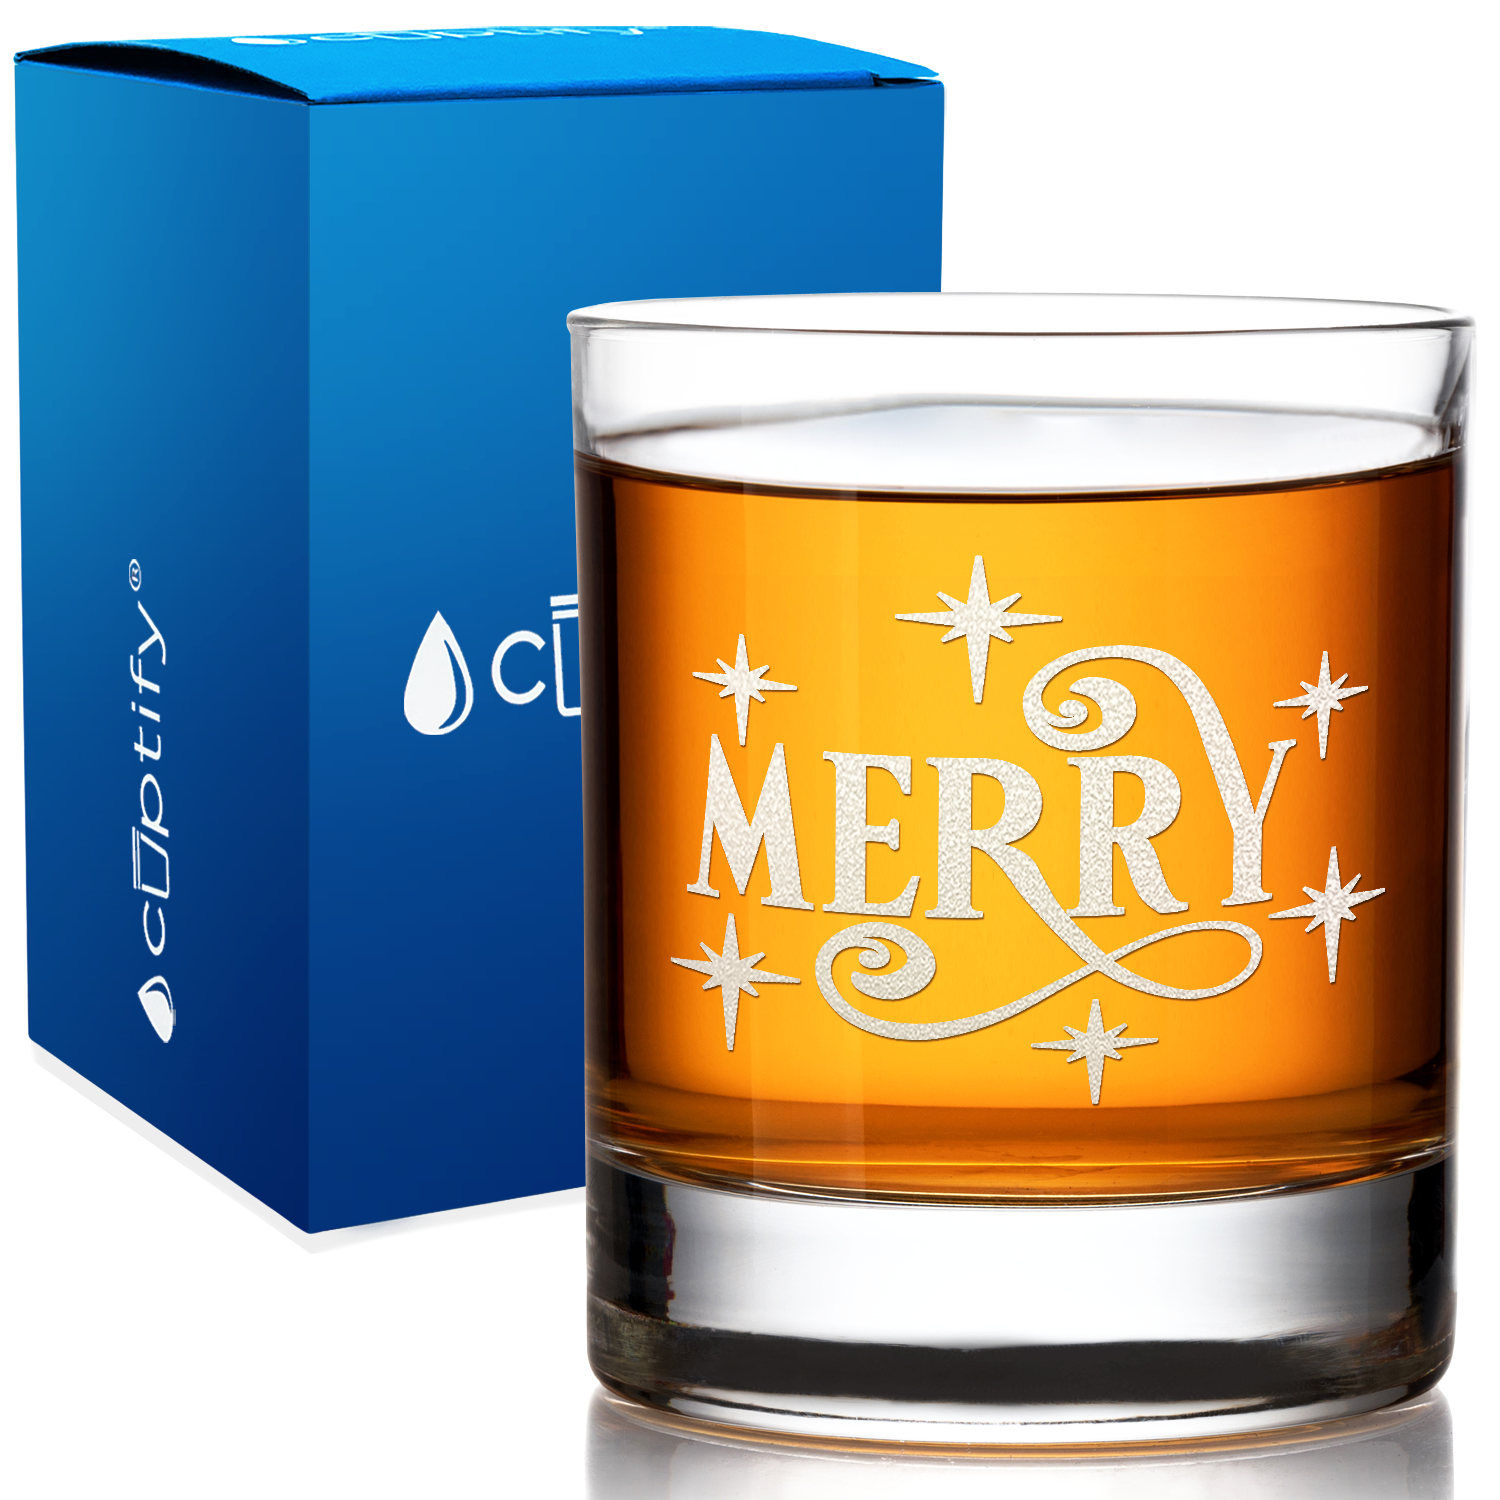 Merry on 10.25 oz Old Fashioned Glass